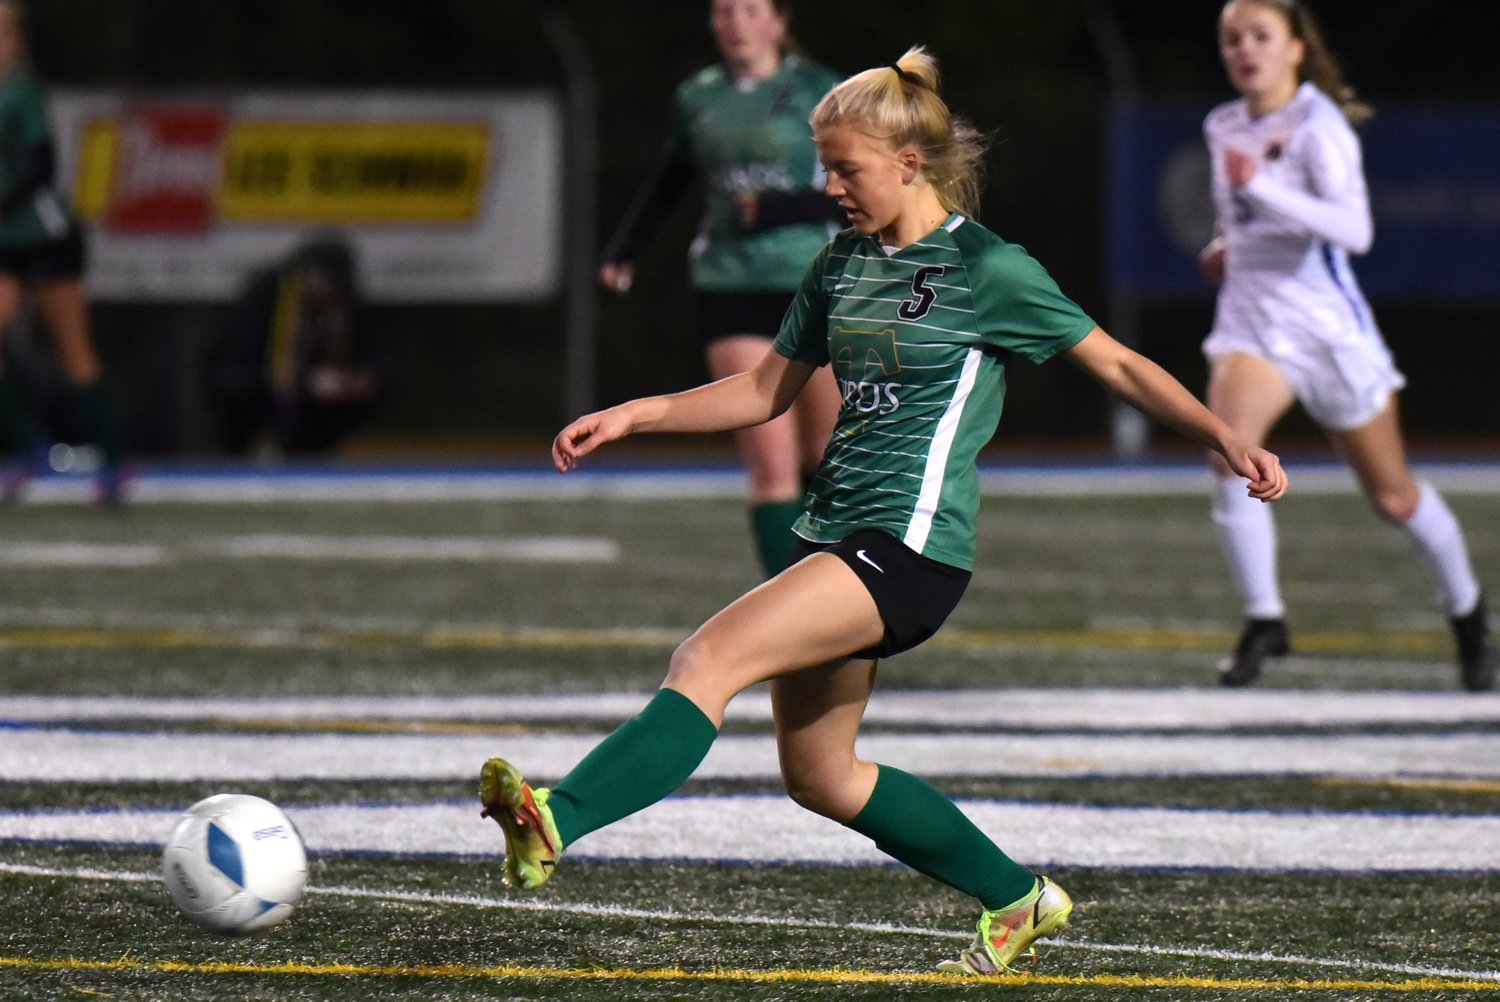 Sophie Boatright sends the ball upfield during Tumwater's 3-1 loss to Columbia River in the 2A state semifinals at Shoreline Stadium on Nov. 18.